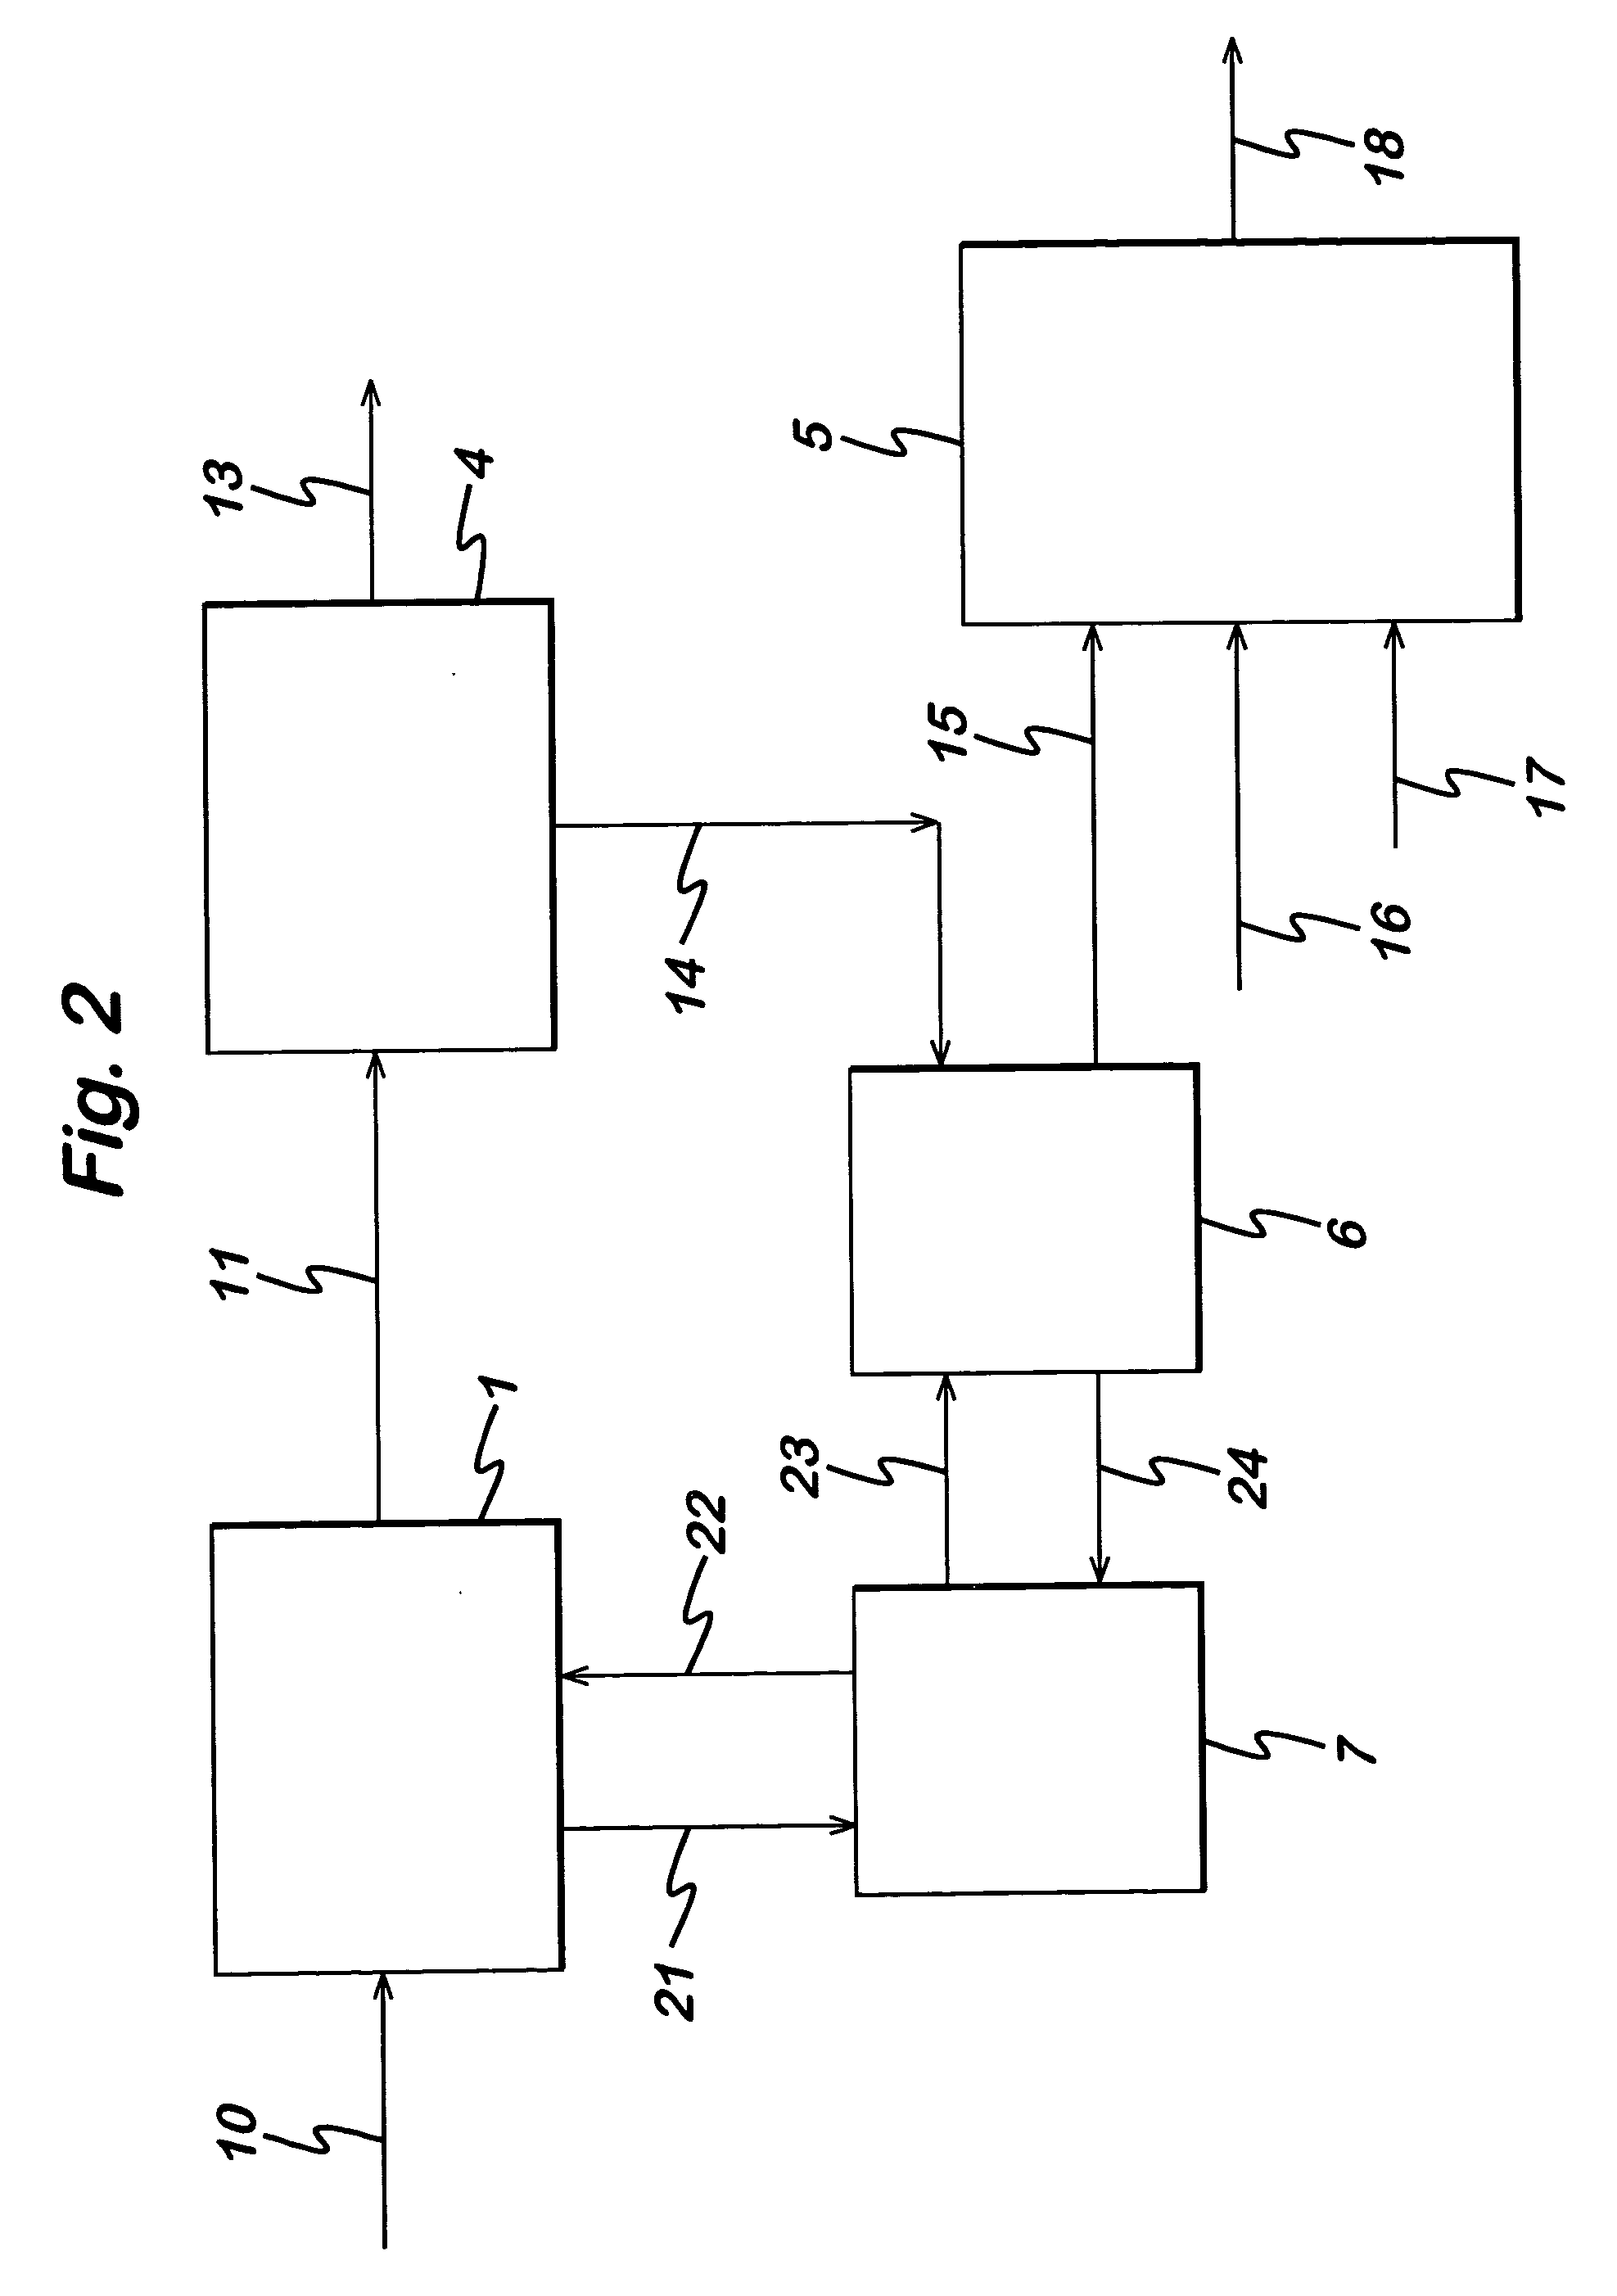 Method for reducing nitrogen oxide emissions in industrial process